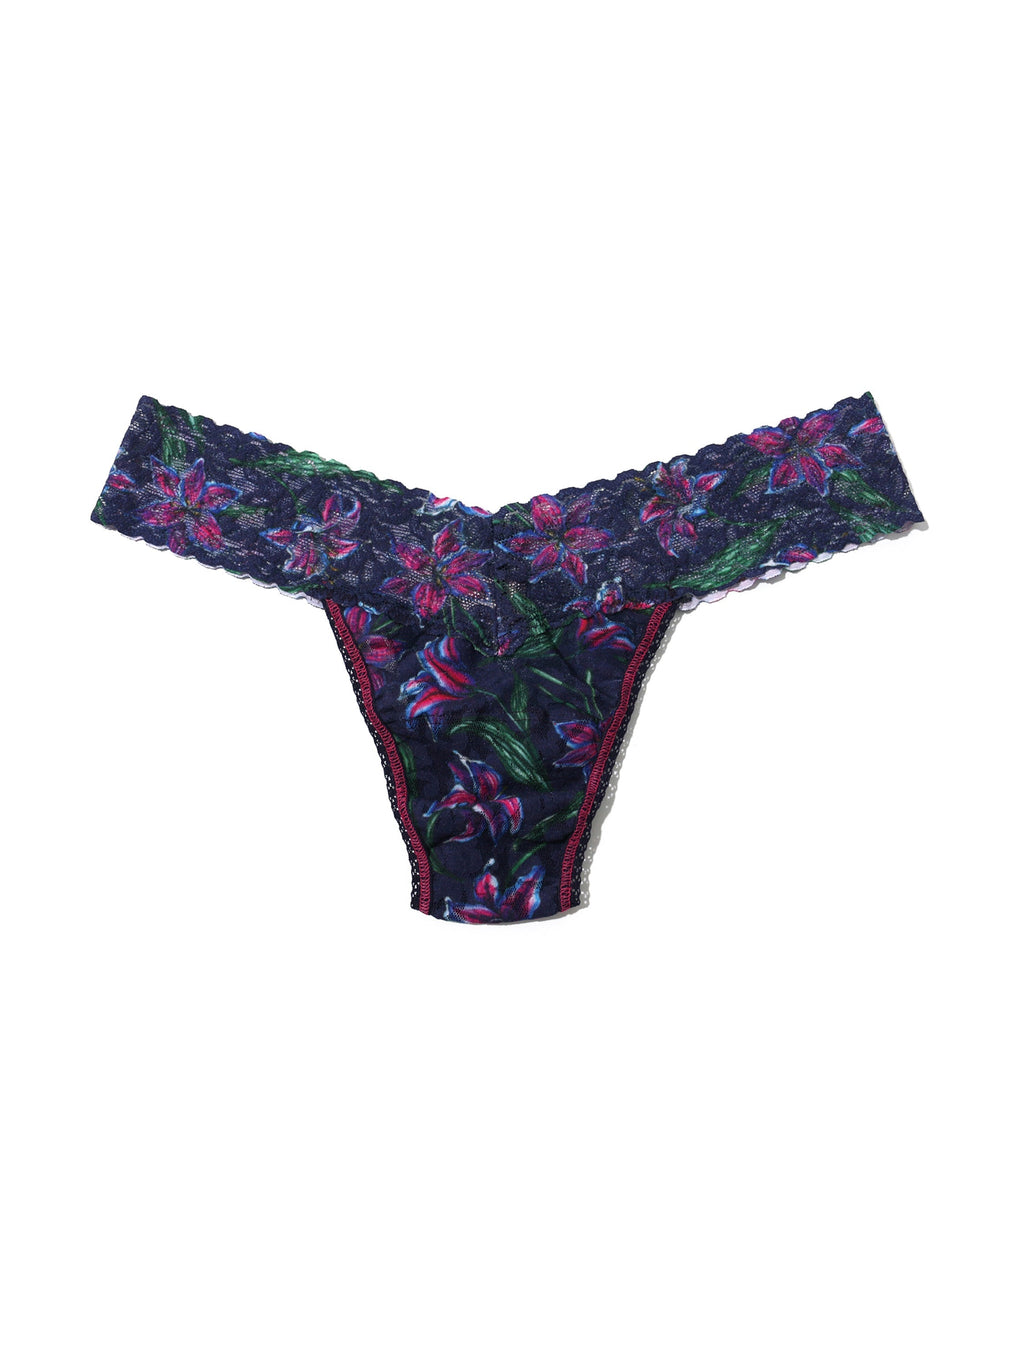 Printed Signature Lace Low Rise Thong Twilight Bloom Sale | Hanky Panky